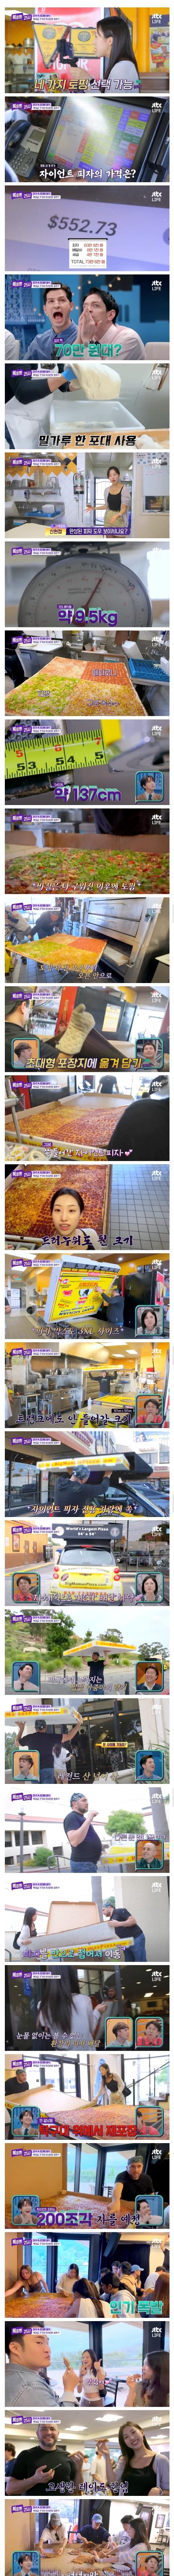 730,000 won for a round of American pizza